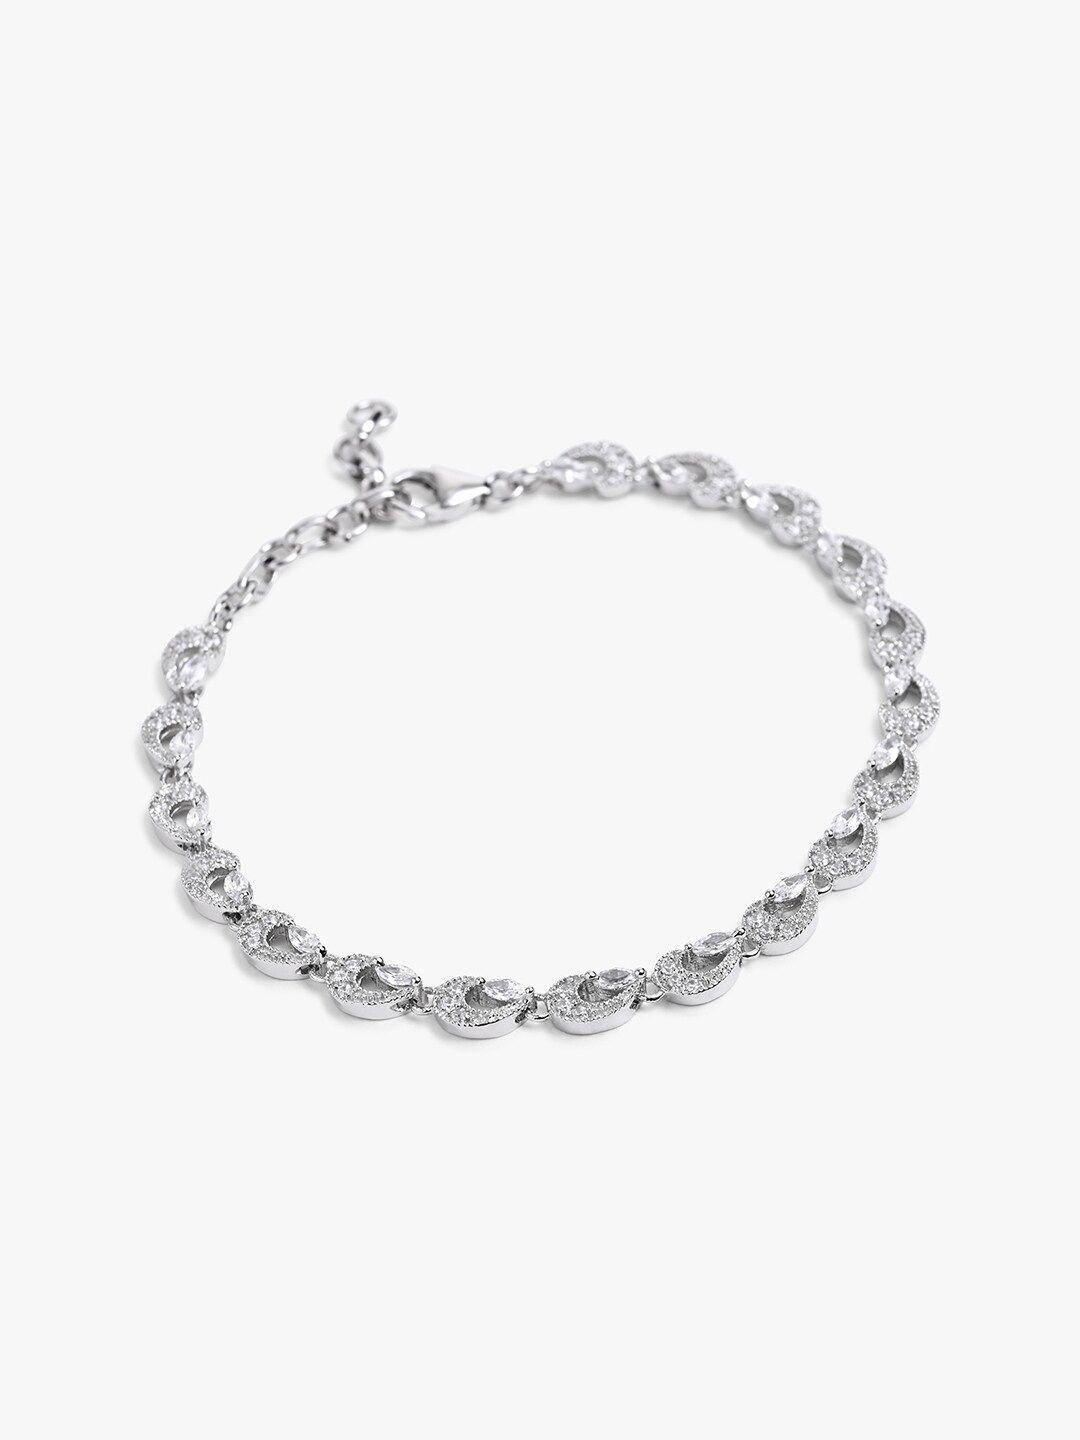 mikoto by fablestreet women sterling silver cubic zirconia rhodium-plated link bracelet